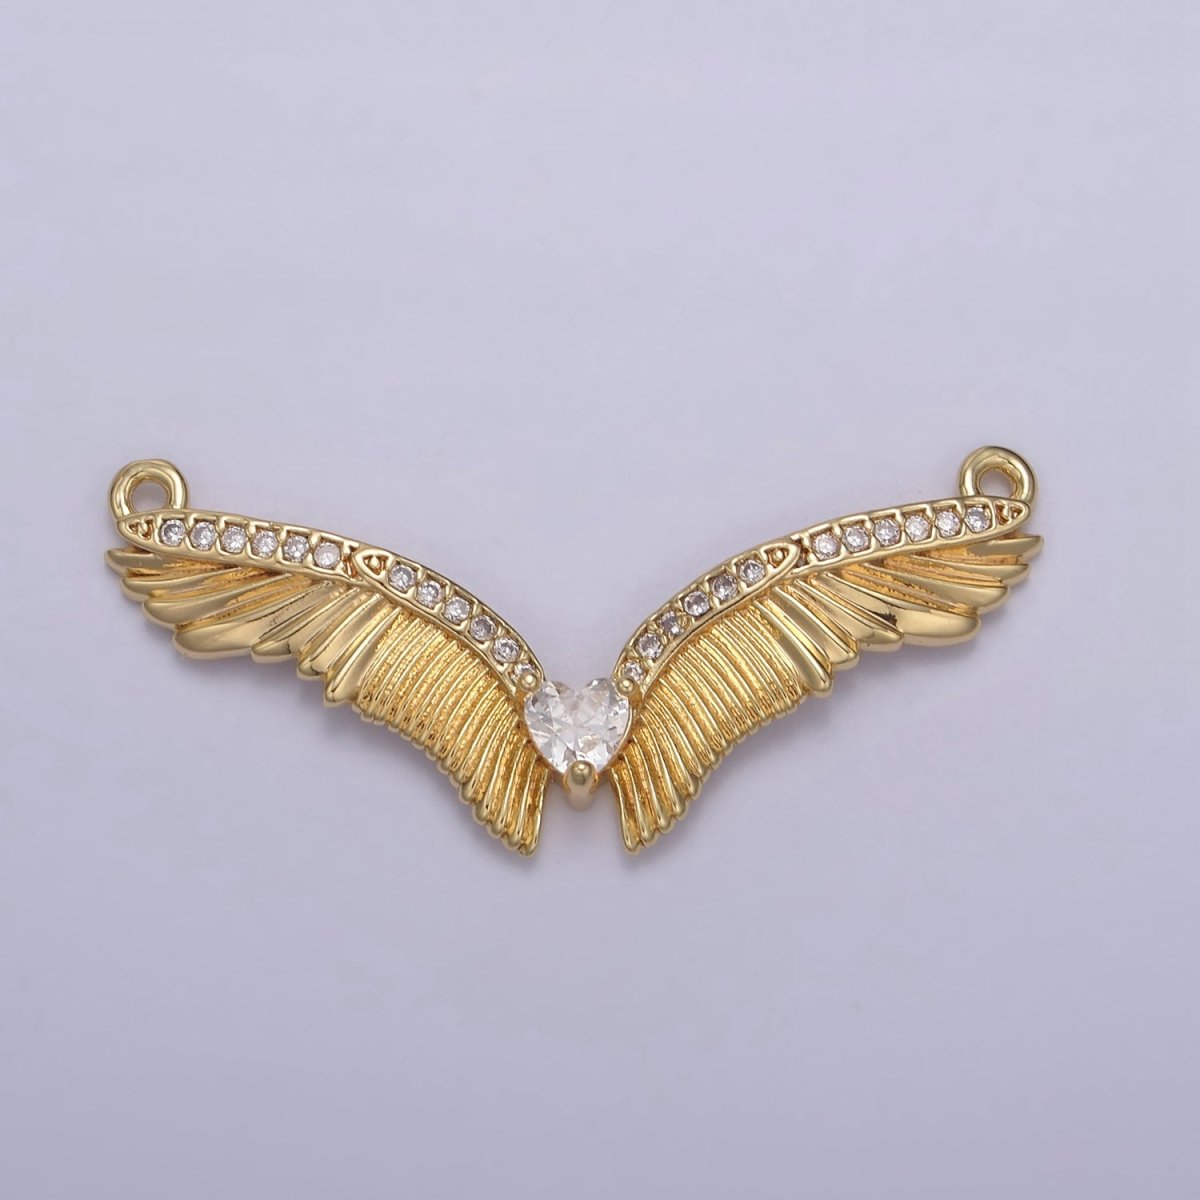 14k Gold Filled Angel Wing Charm Connector for Necklace Component Link Connector F-628 - DLUXCA